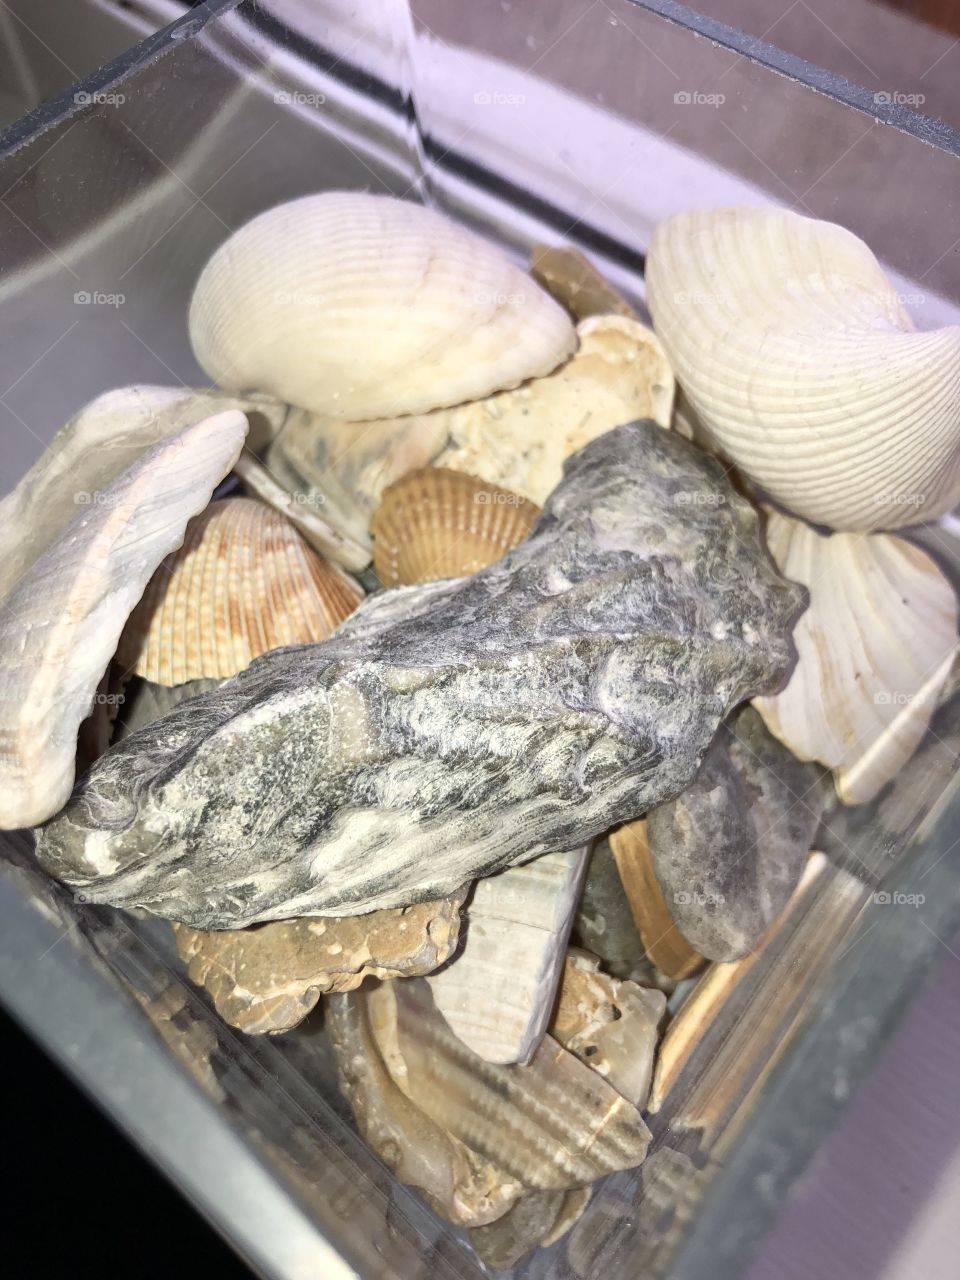 Who doesn’t love shells